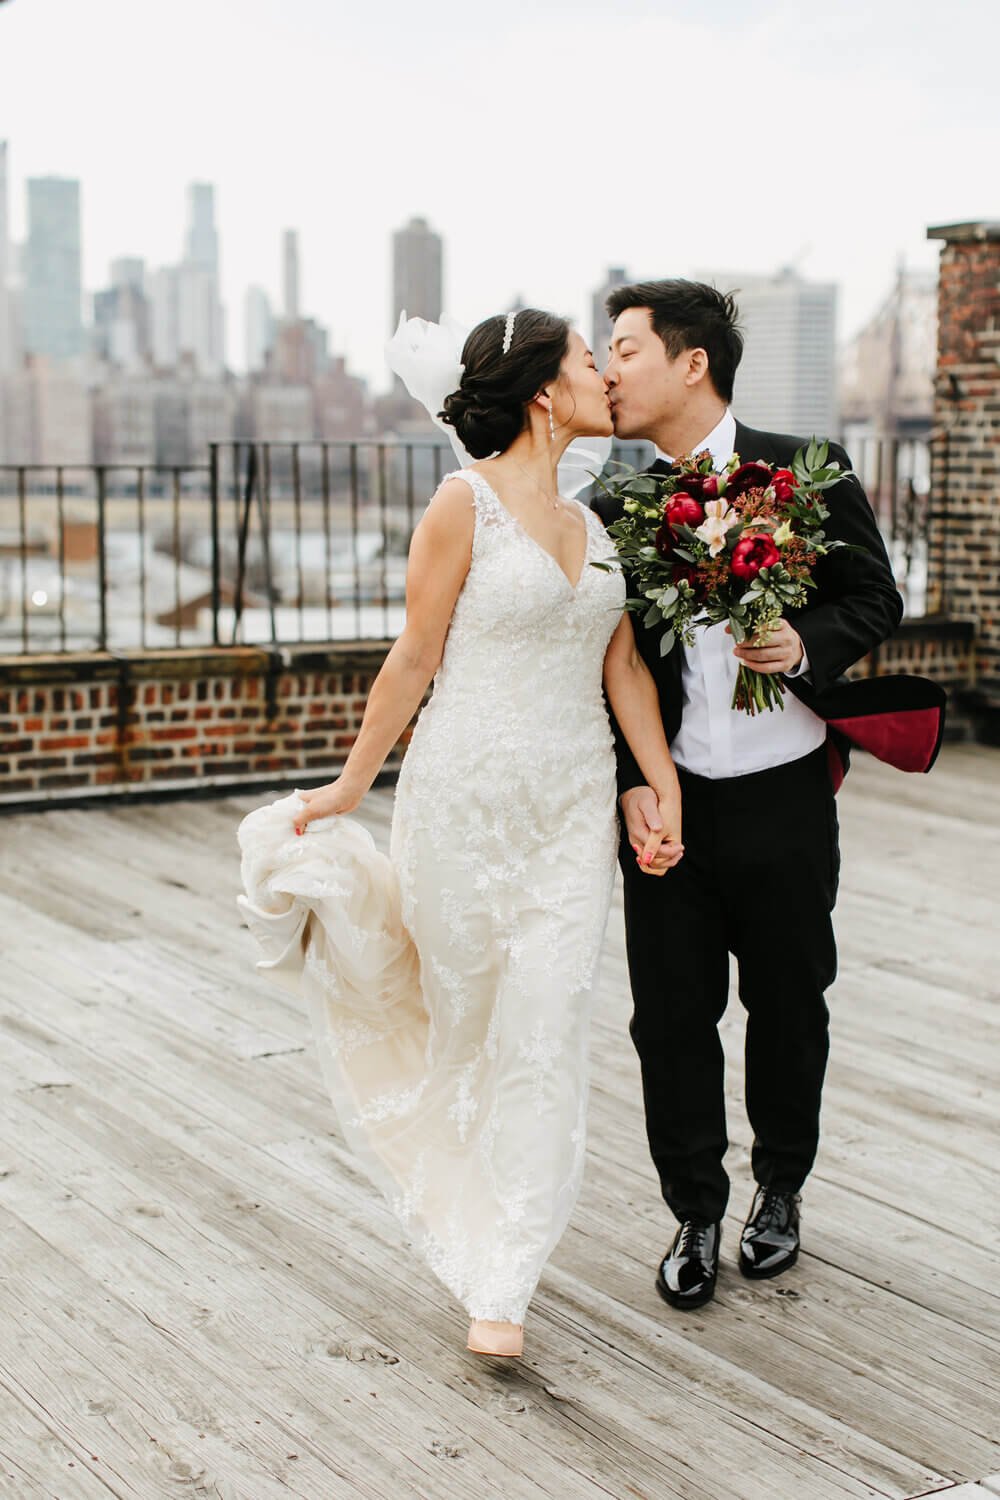 Bride and groom share a kiss on a city rooftop, with the New York skyline in the backdrop, epitomizing urban elegance.